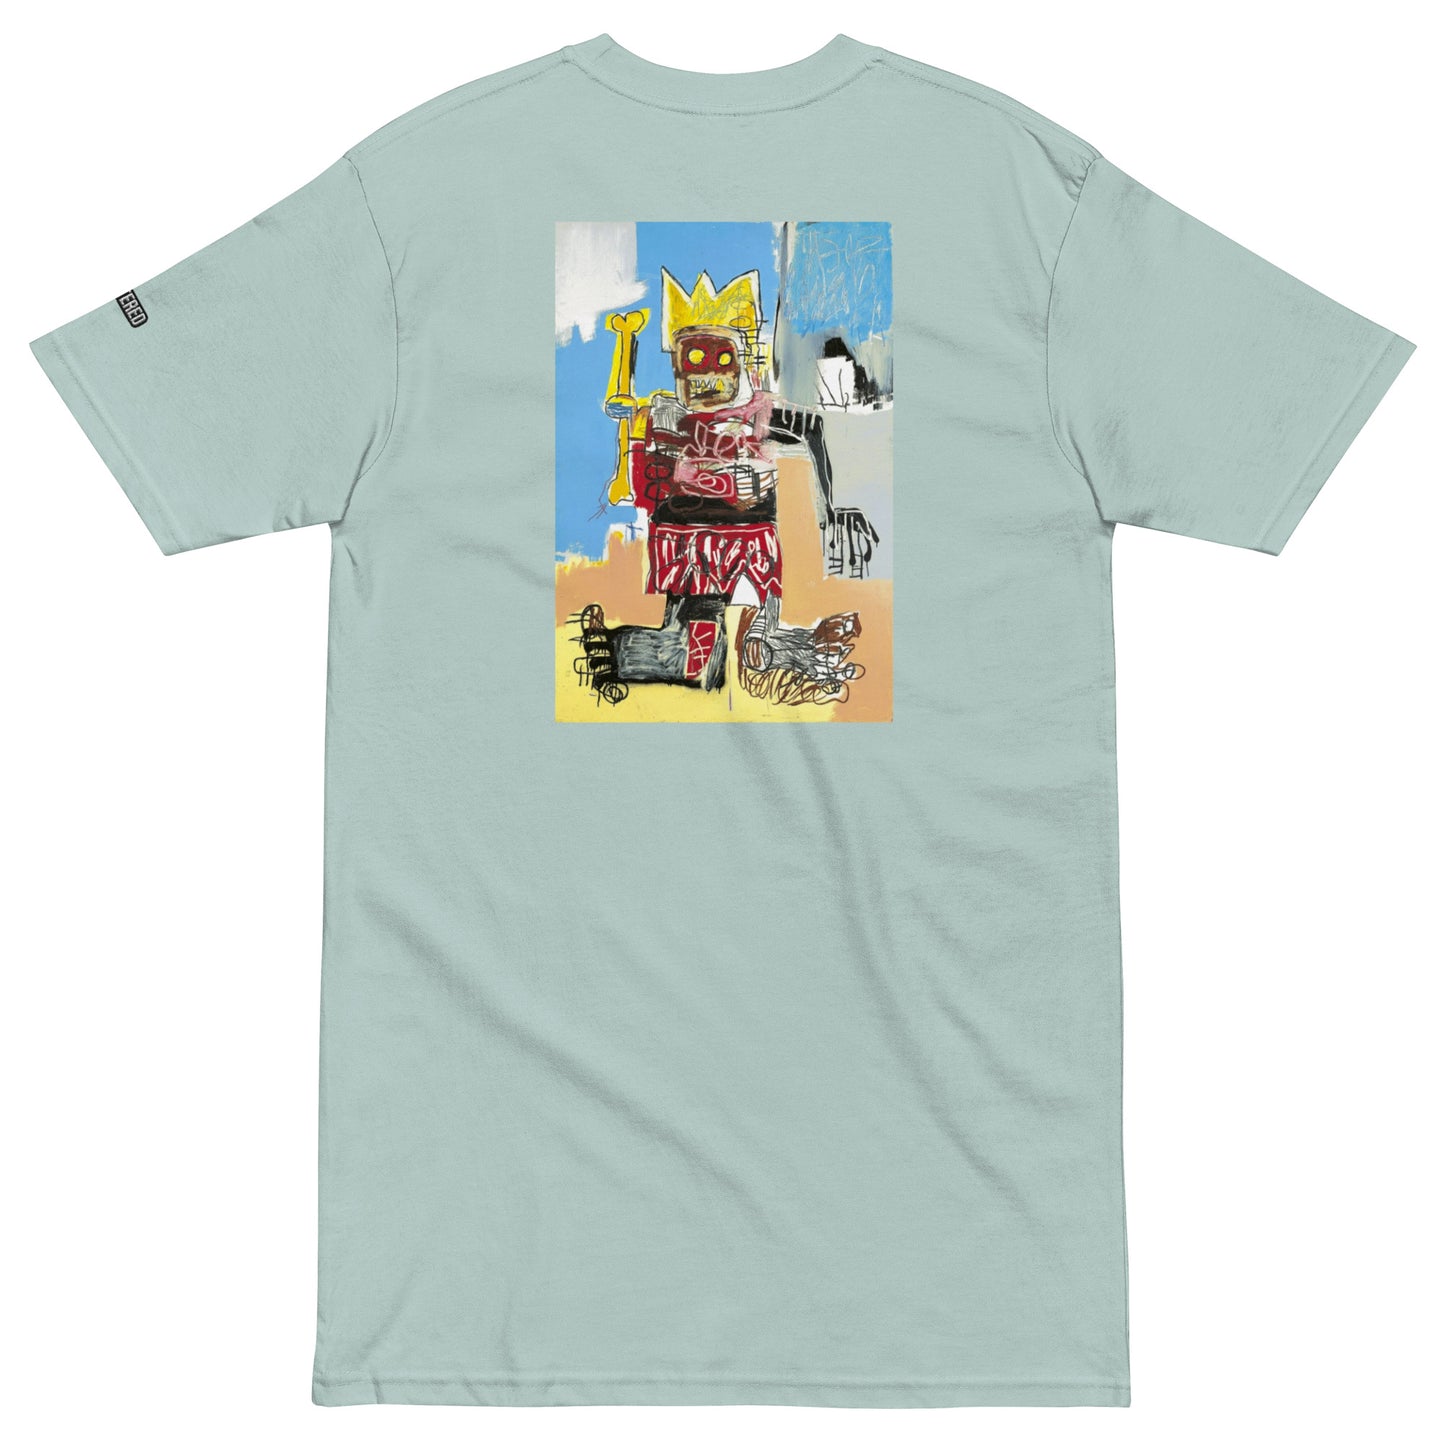 Jean-Michel Basquiat "Untitled" Artwork Embroidered + Printed Premium Agave Blue Streetwear T-shirt Scattered